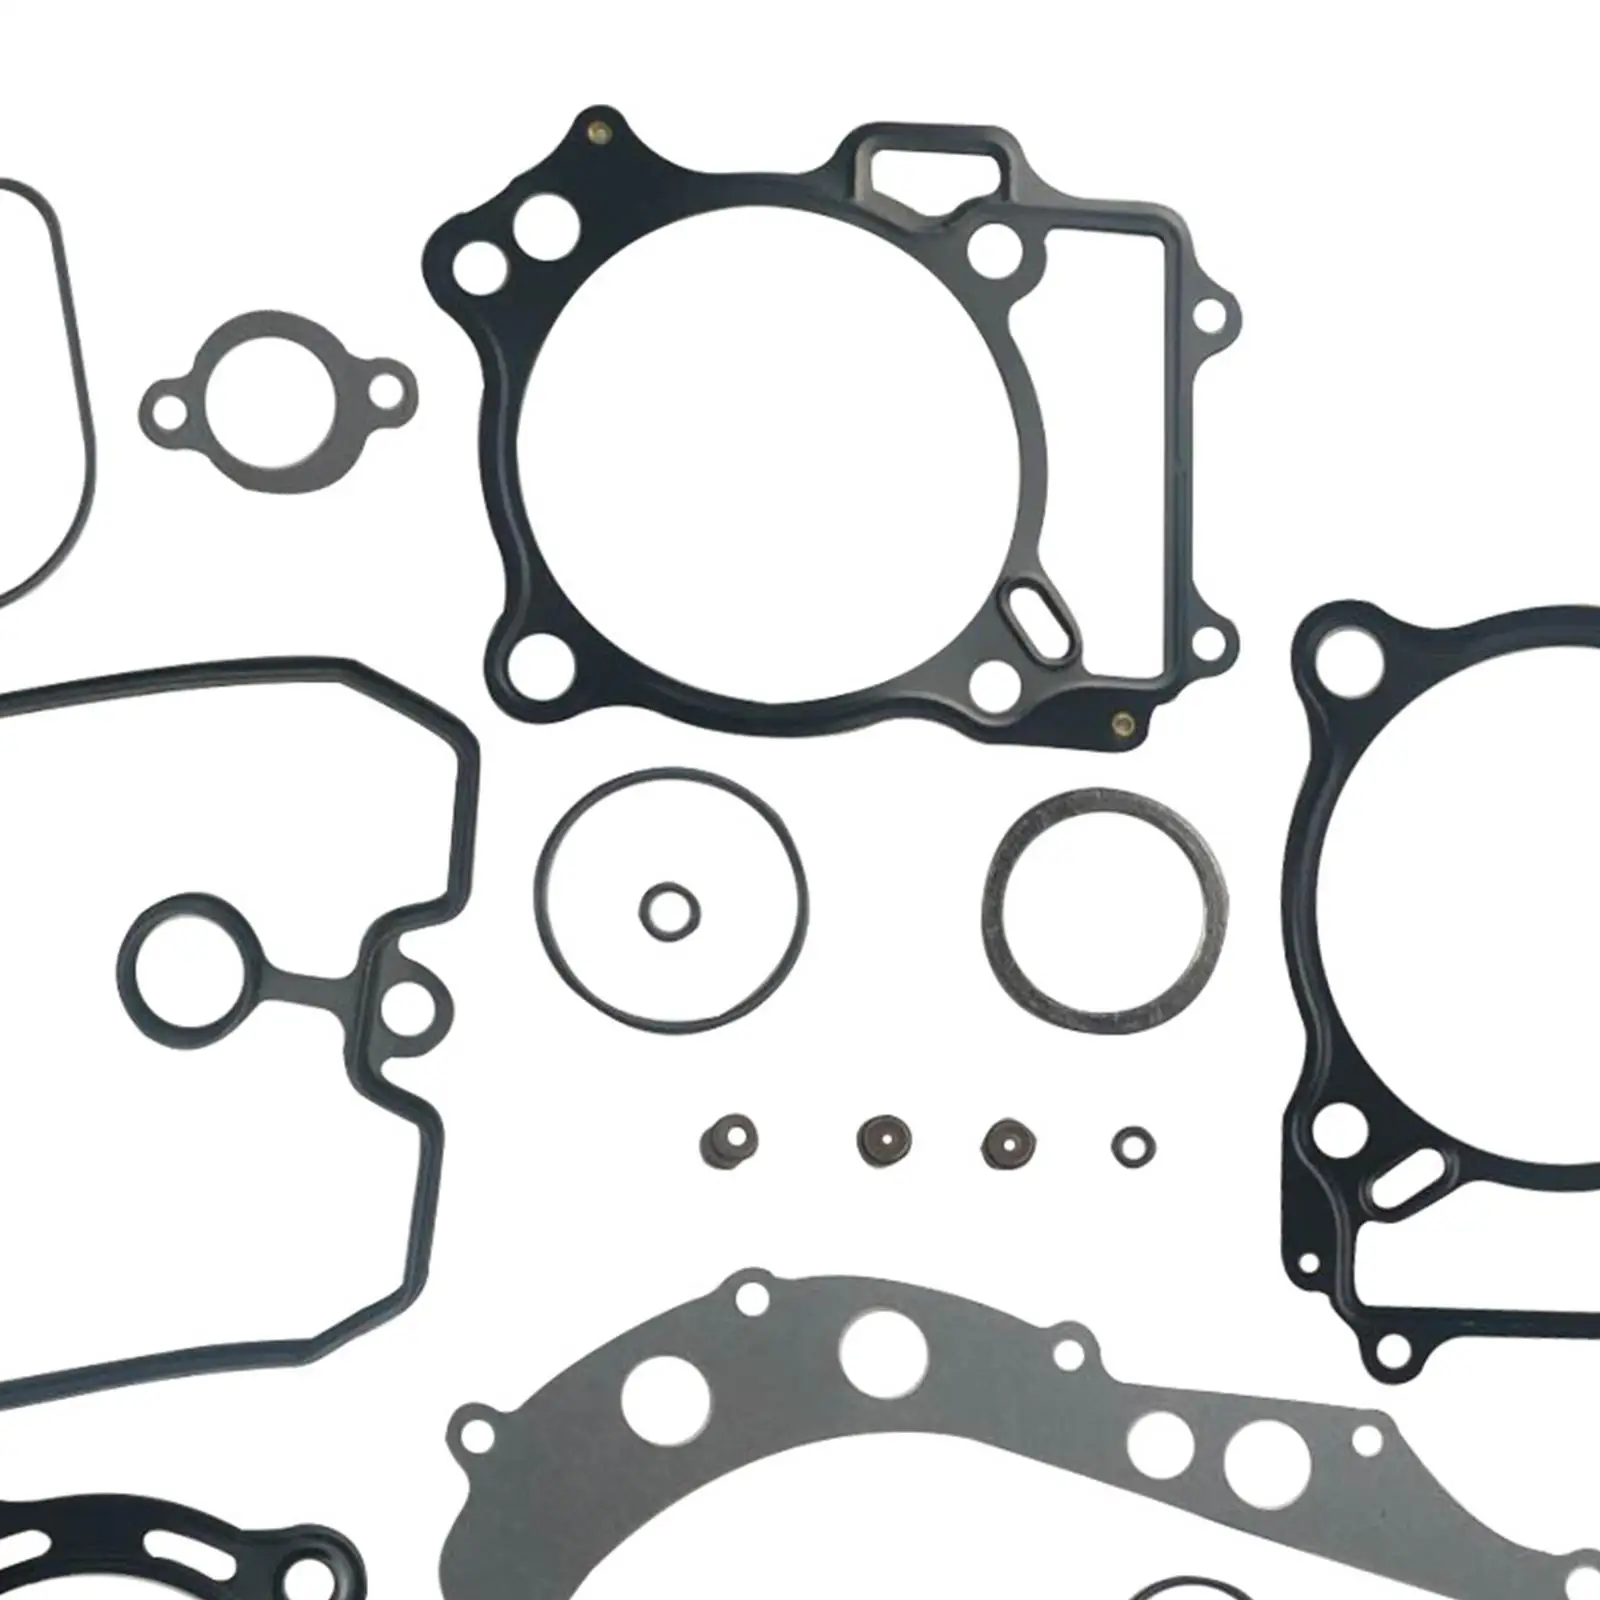 Full Set Gaskets 0934-1676 Top Bottom Parts Professional Direct Replaces Rebuild